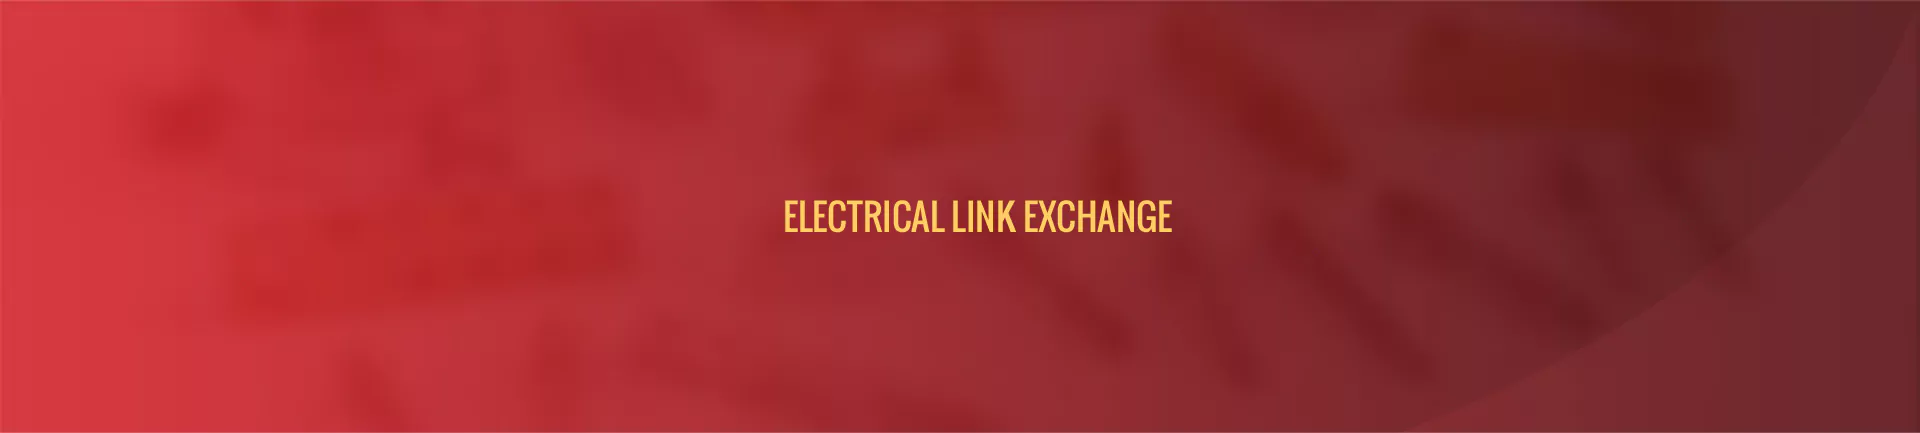 electrical-link-ex-banner